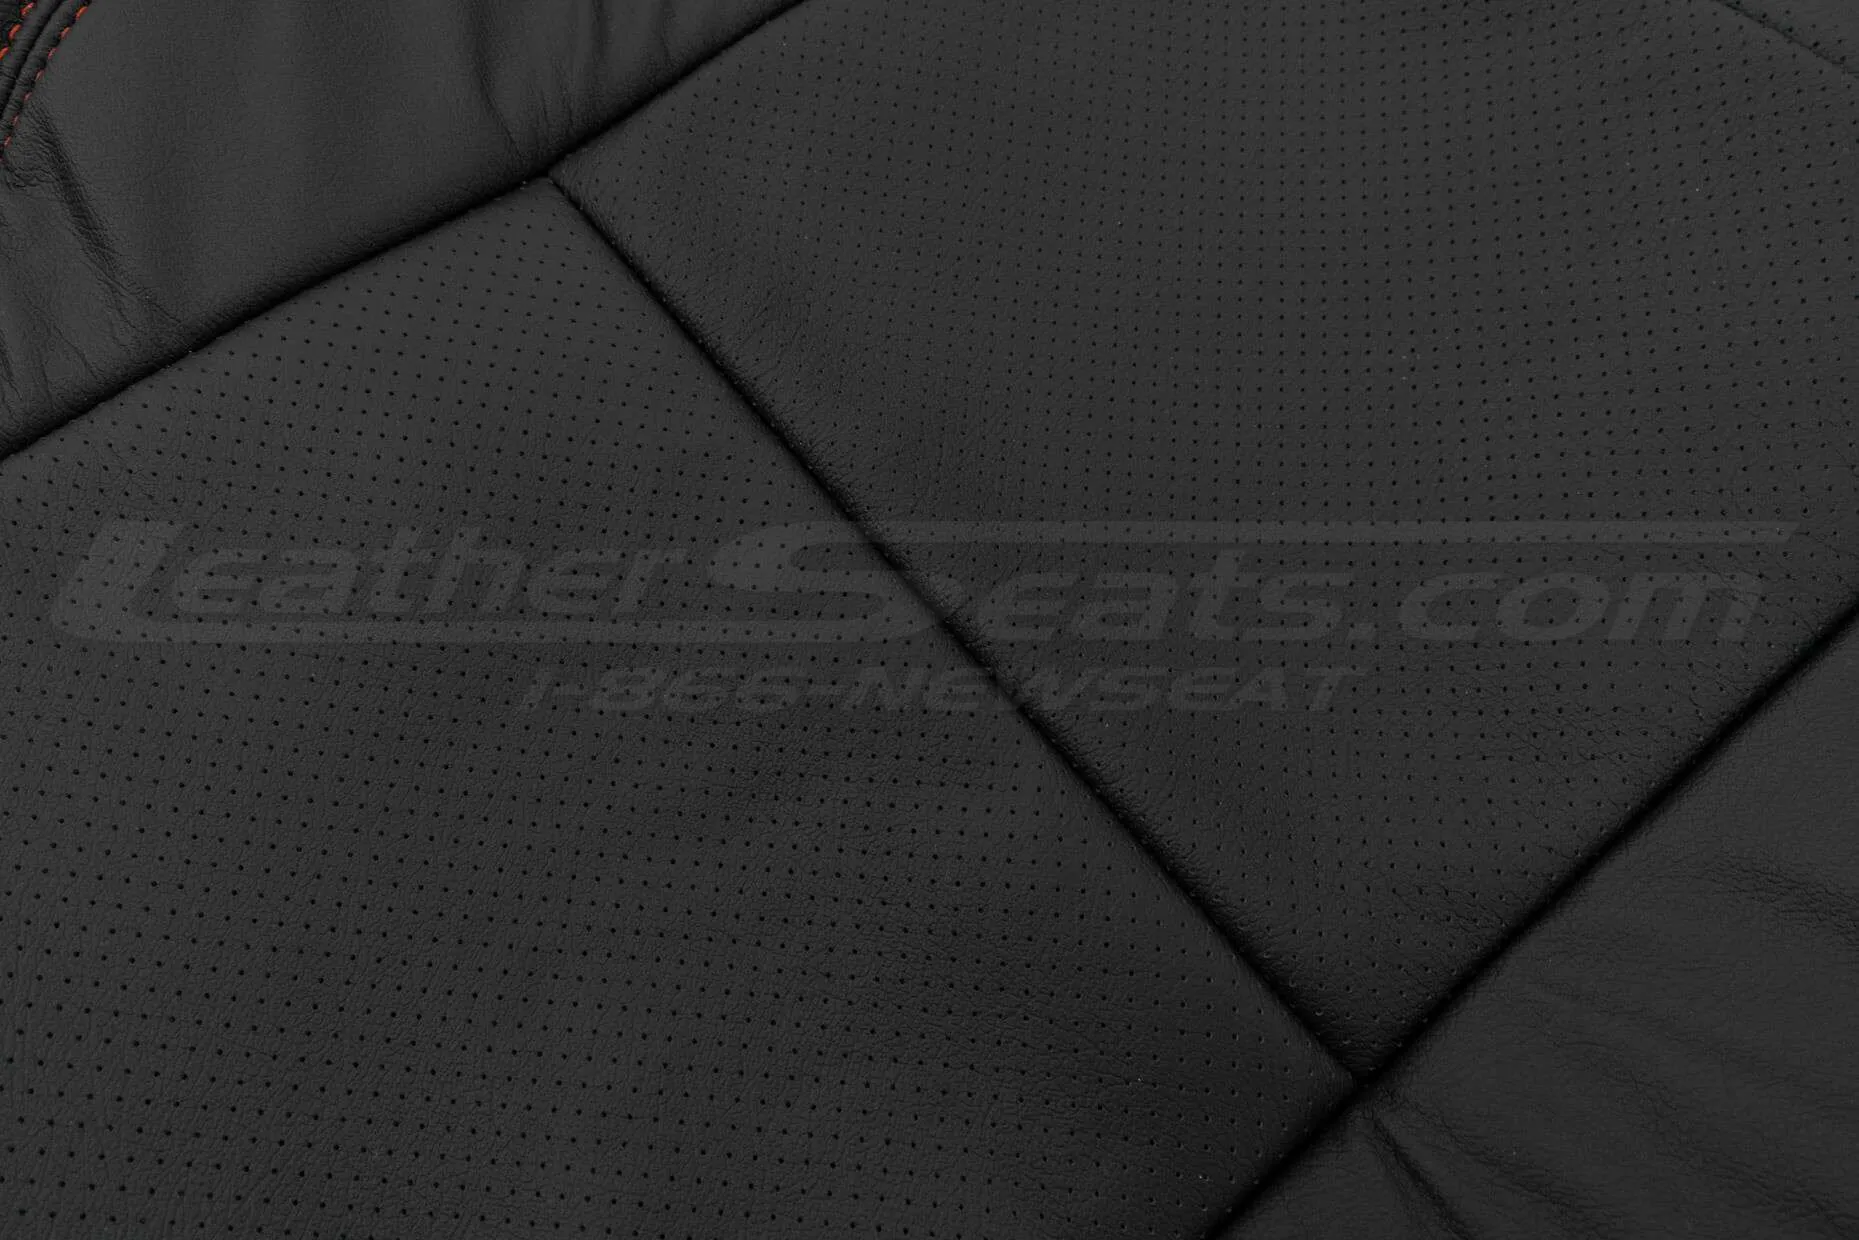 Perforated Black leather close-up